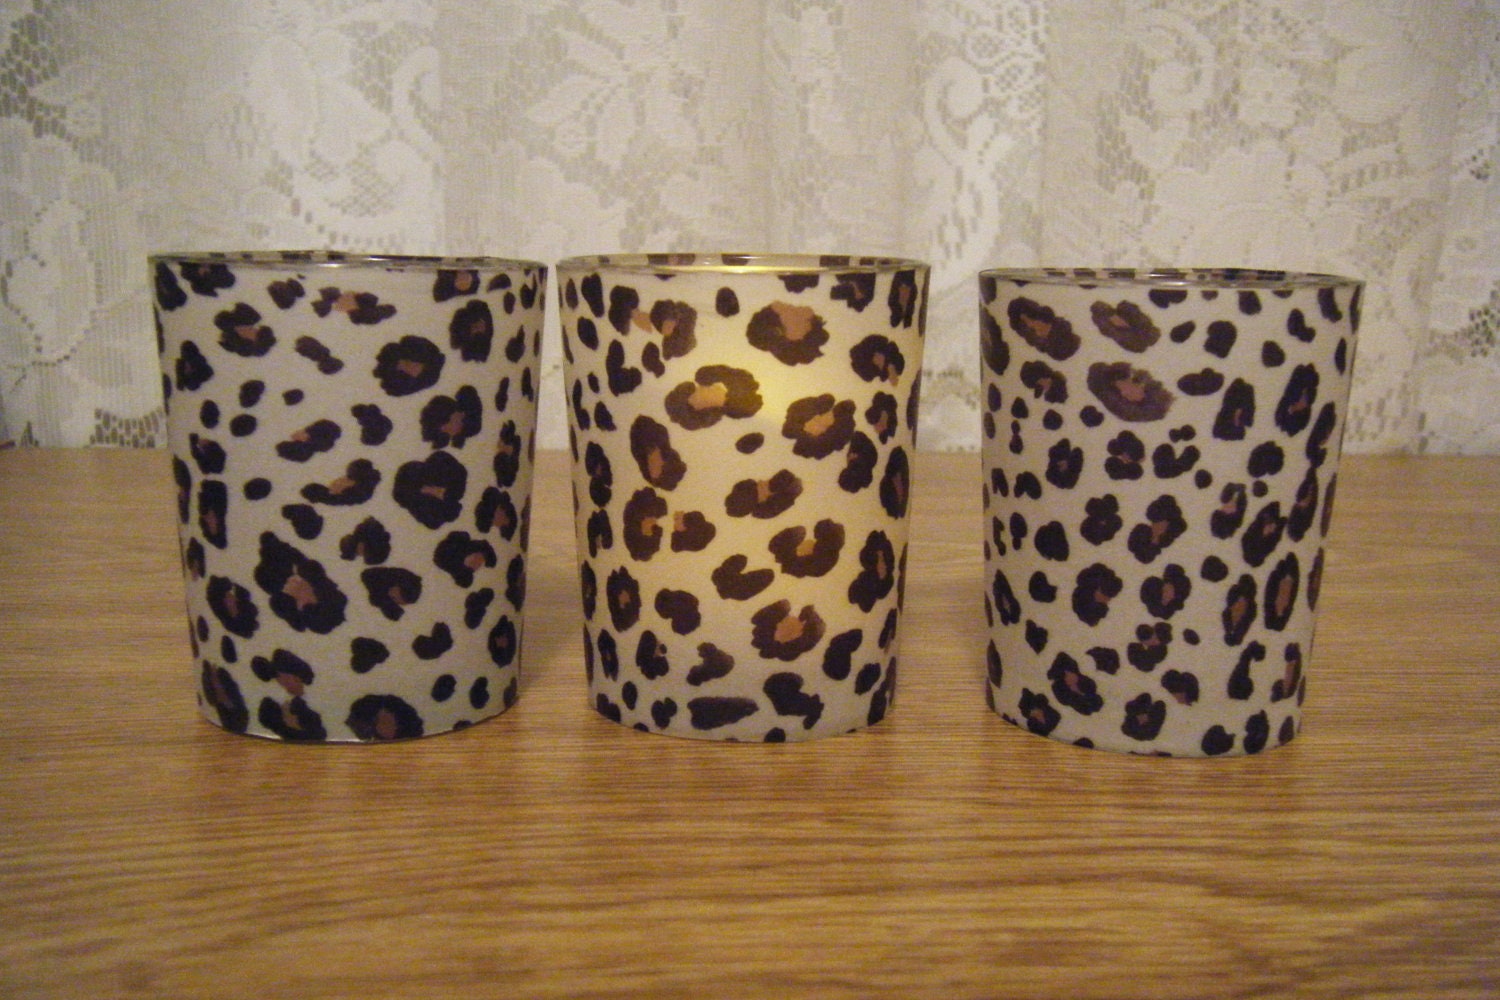 Fun Leopard Votive Candle Holders Set of 3 by SouthernBellWeddings